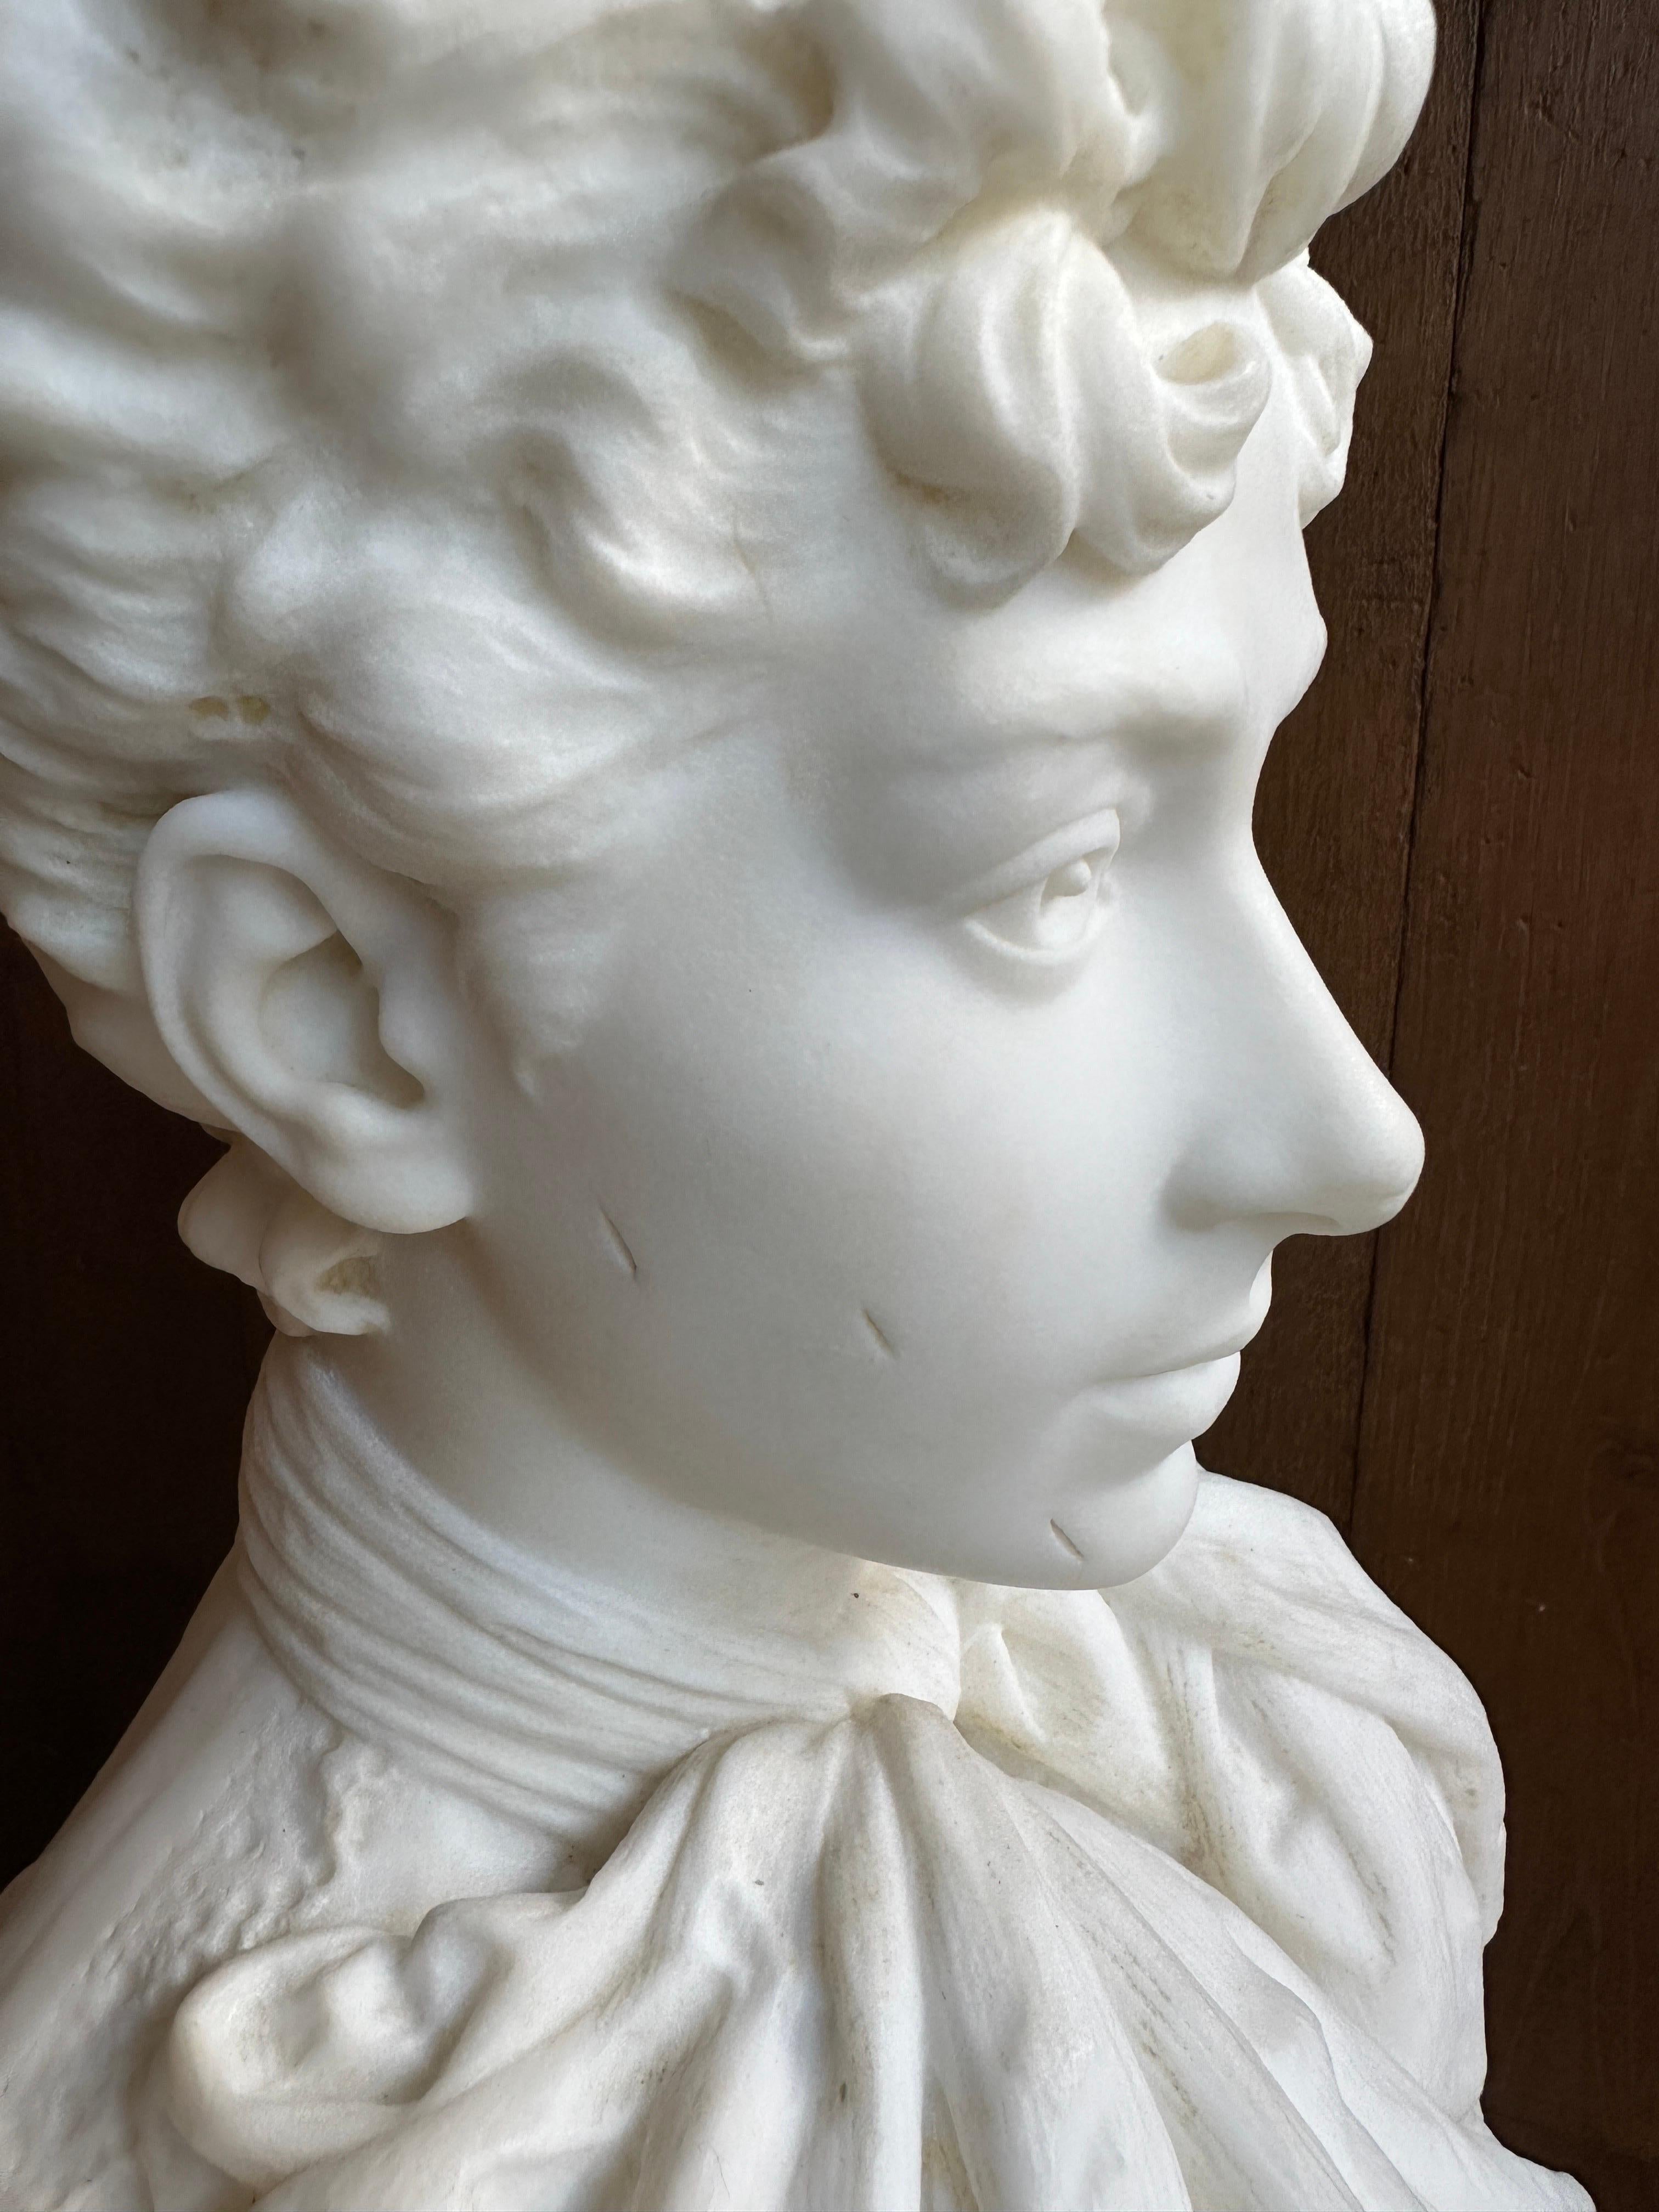 An Italian Antique Statuary White Marble Female Bust BY G Focardi Florence  For Sale 2